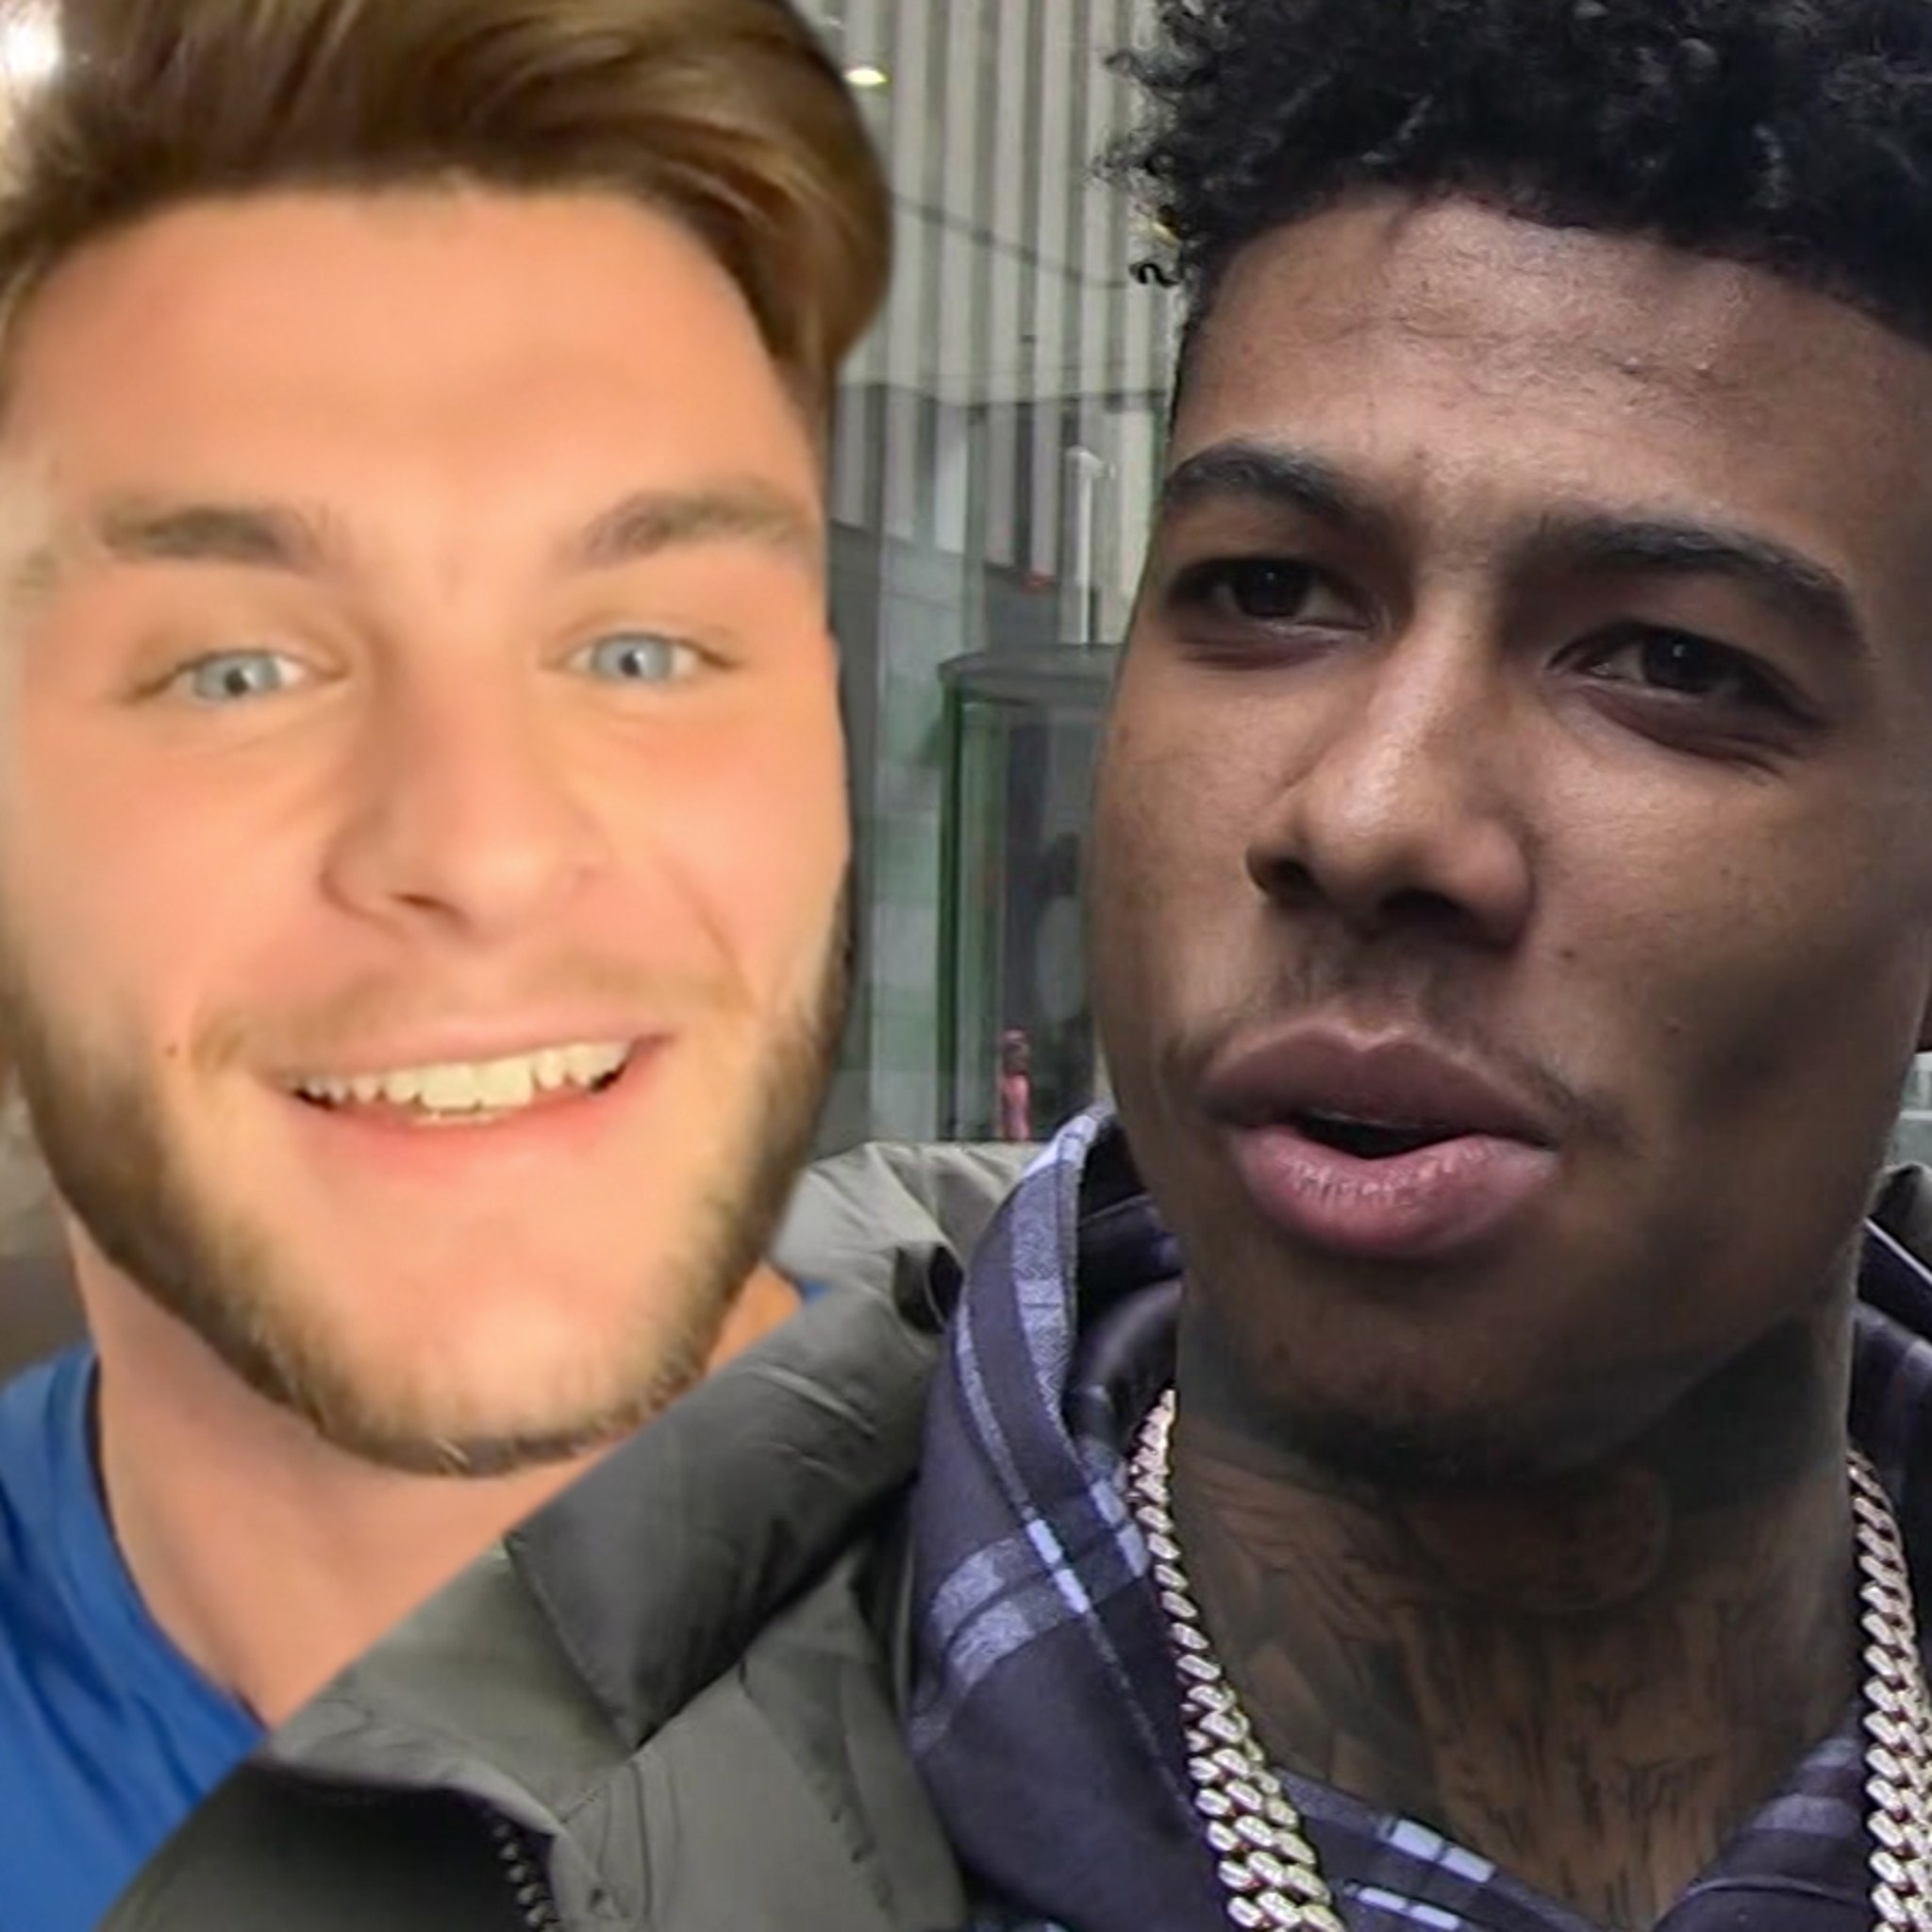 Nick Young and Blueface to face off in celebrity boxing match